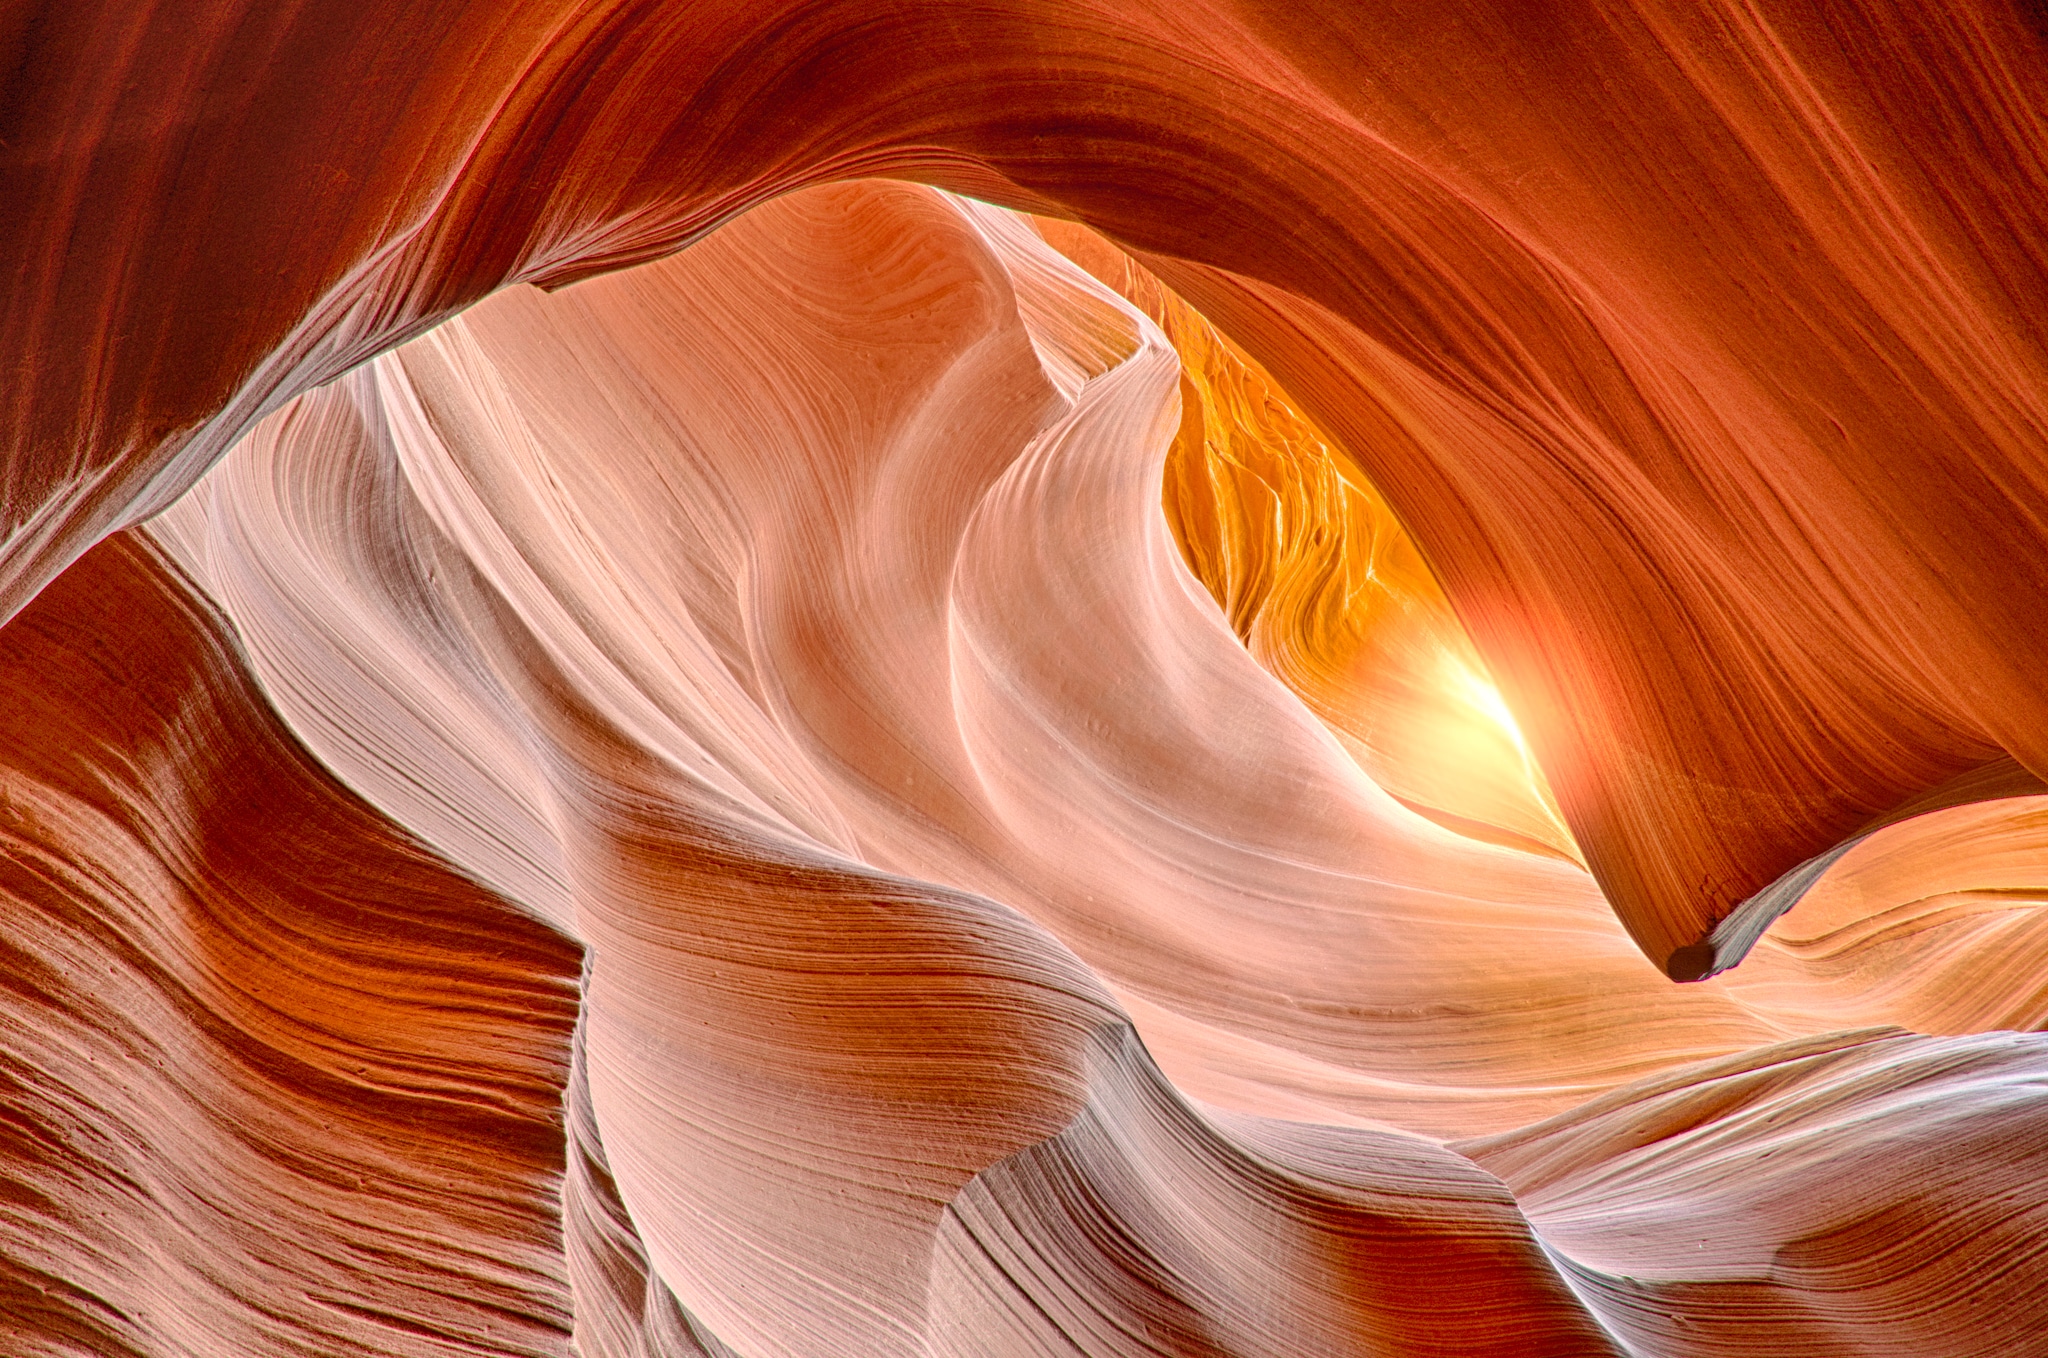 View looking up at the sun in Lower Antelope Canyon, a slot canyon just east of Page, Arizona.